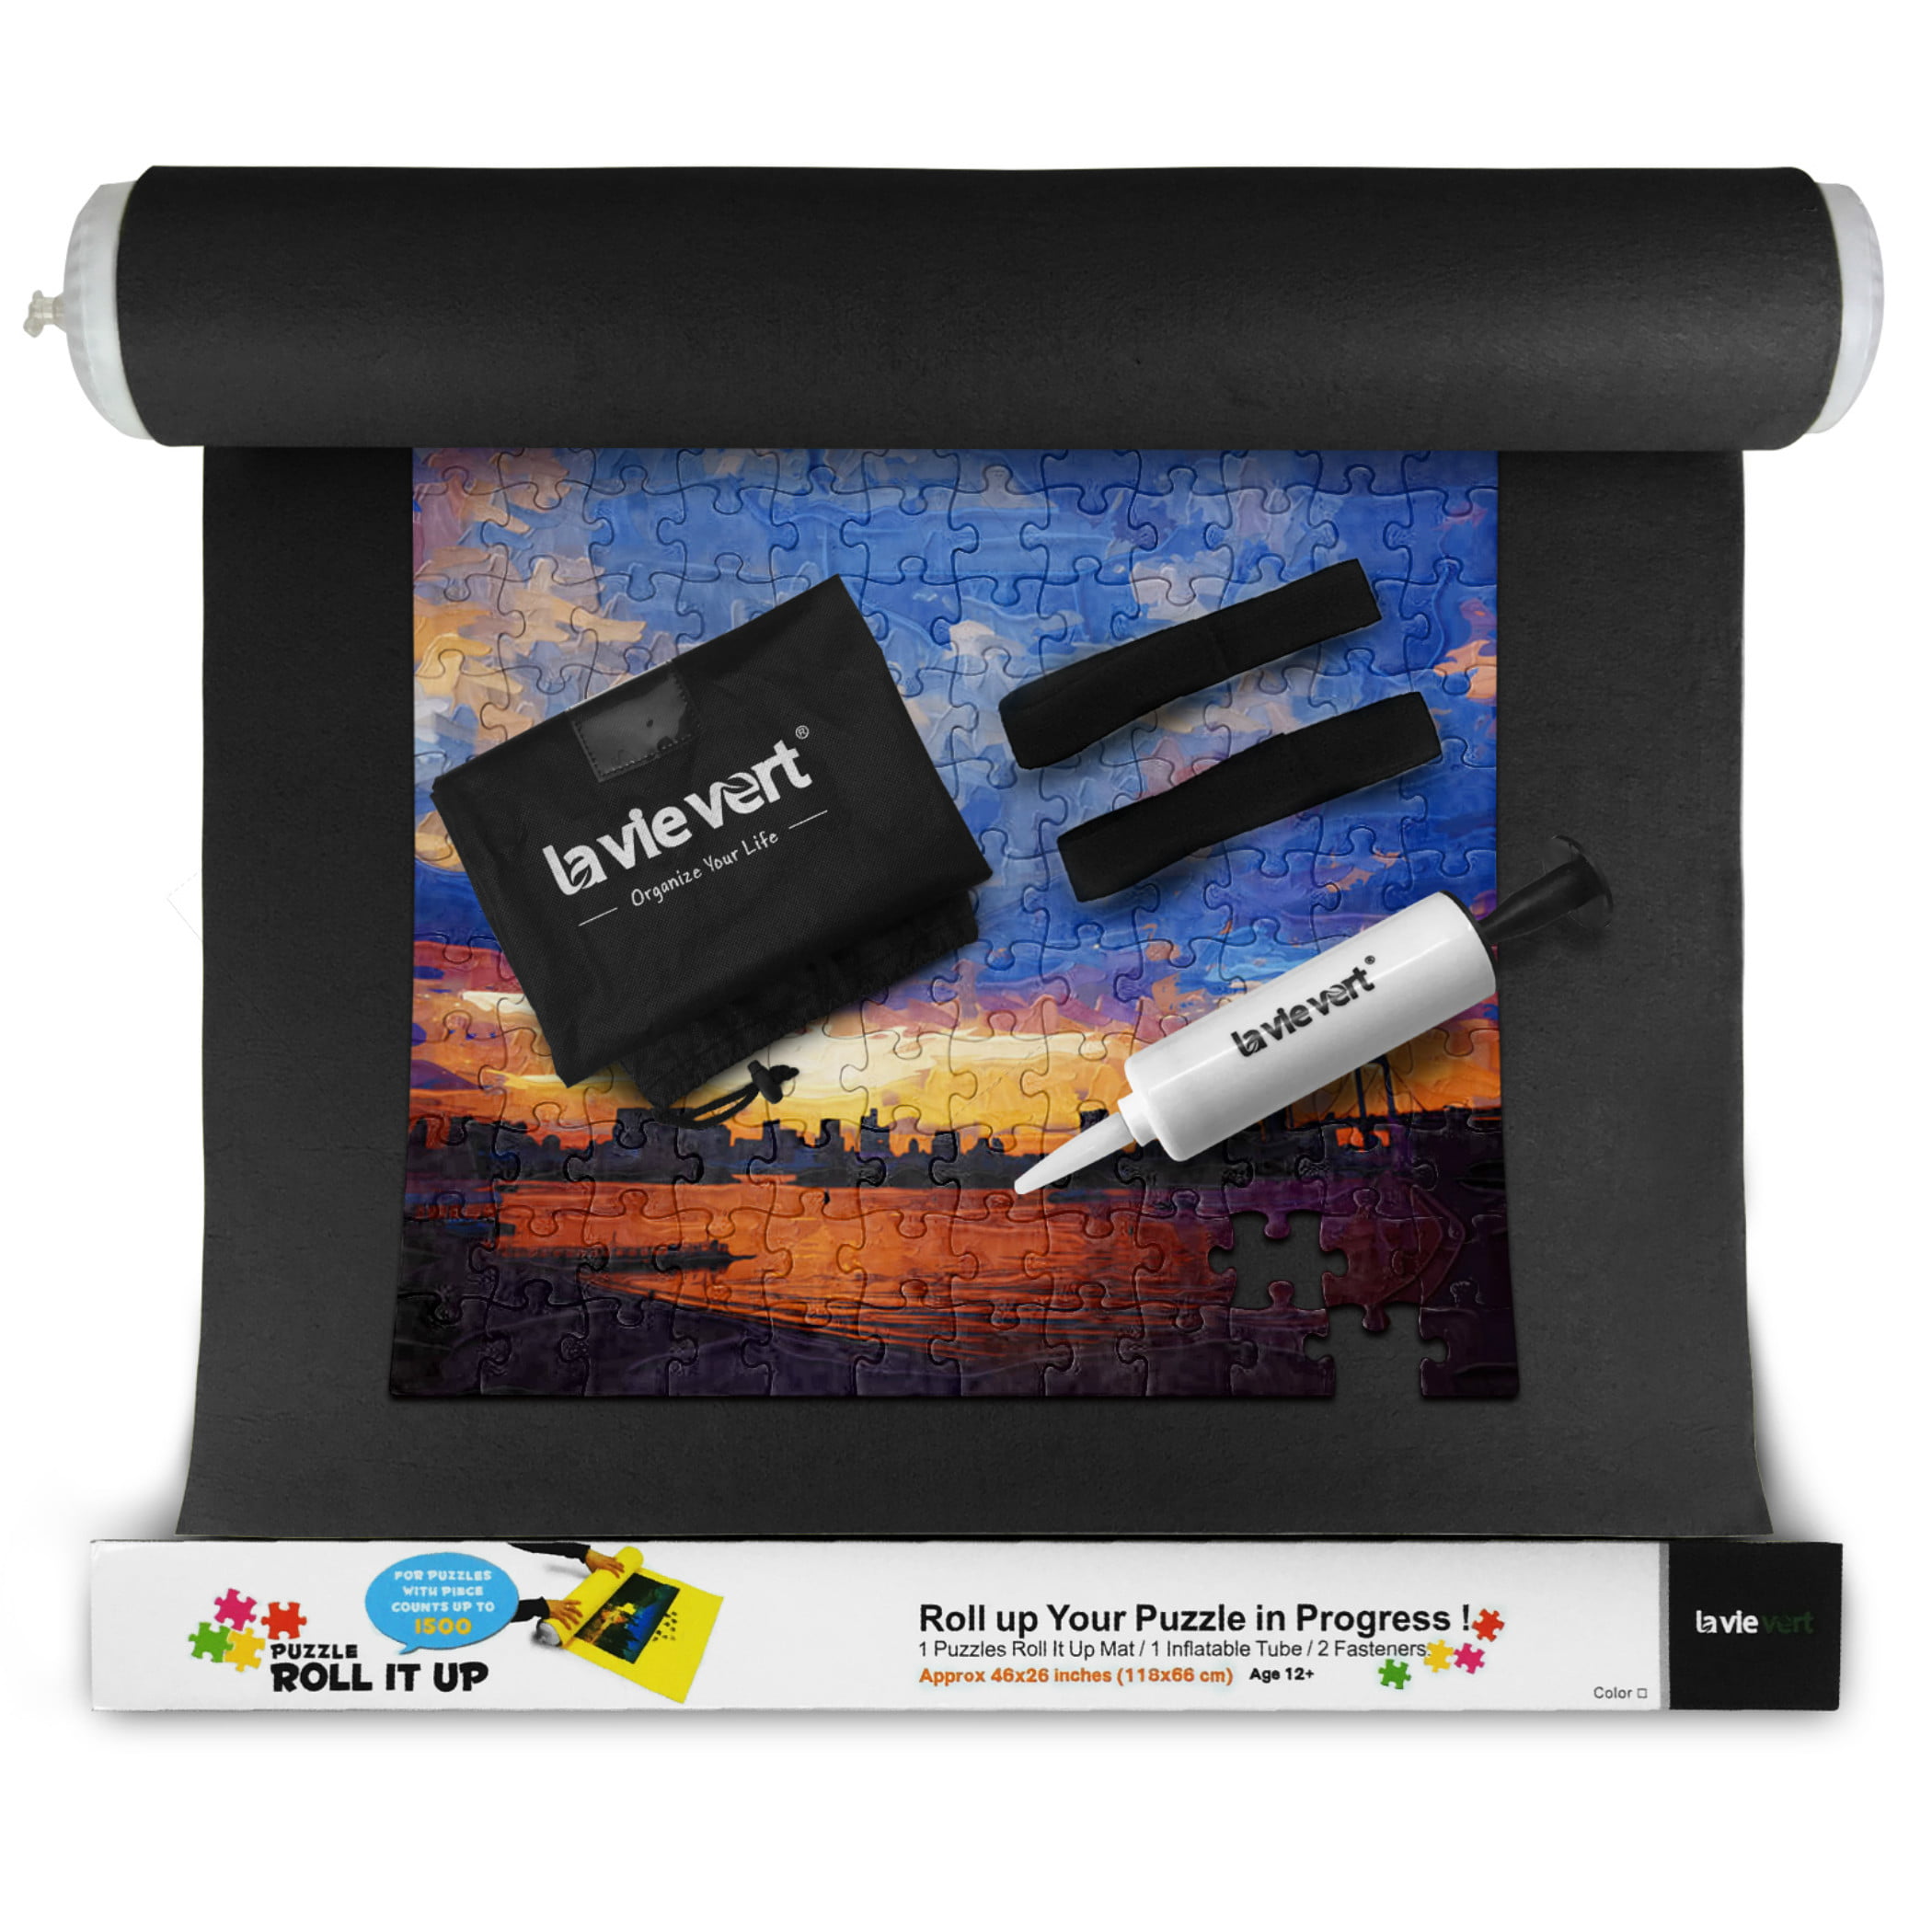 MasterPieces Jumbo Jigsaw Puzzle Roll up Mat48x36 Inches for sale online